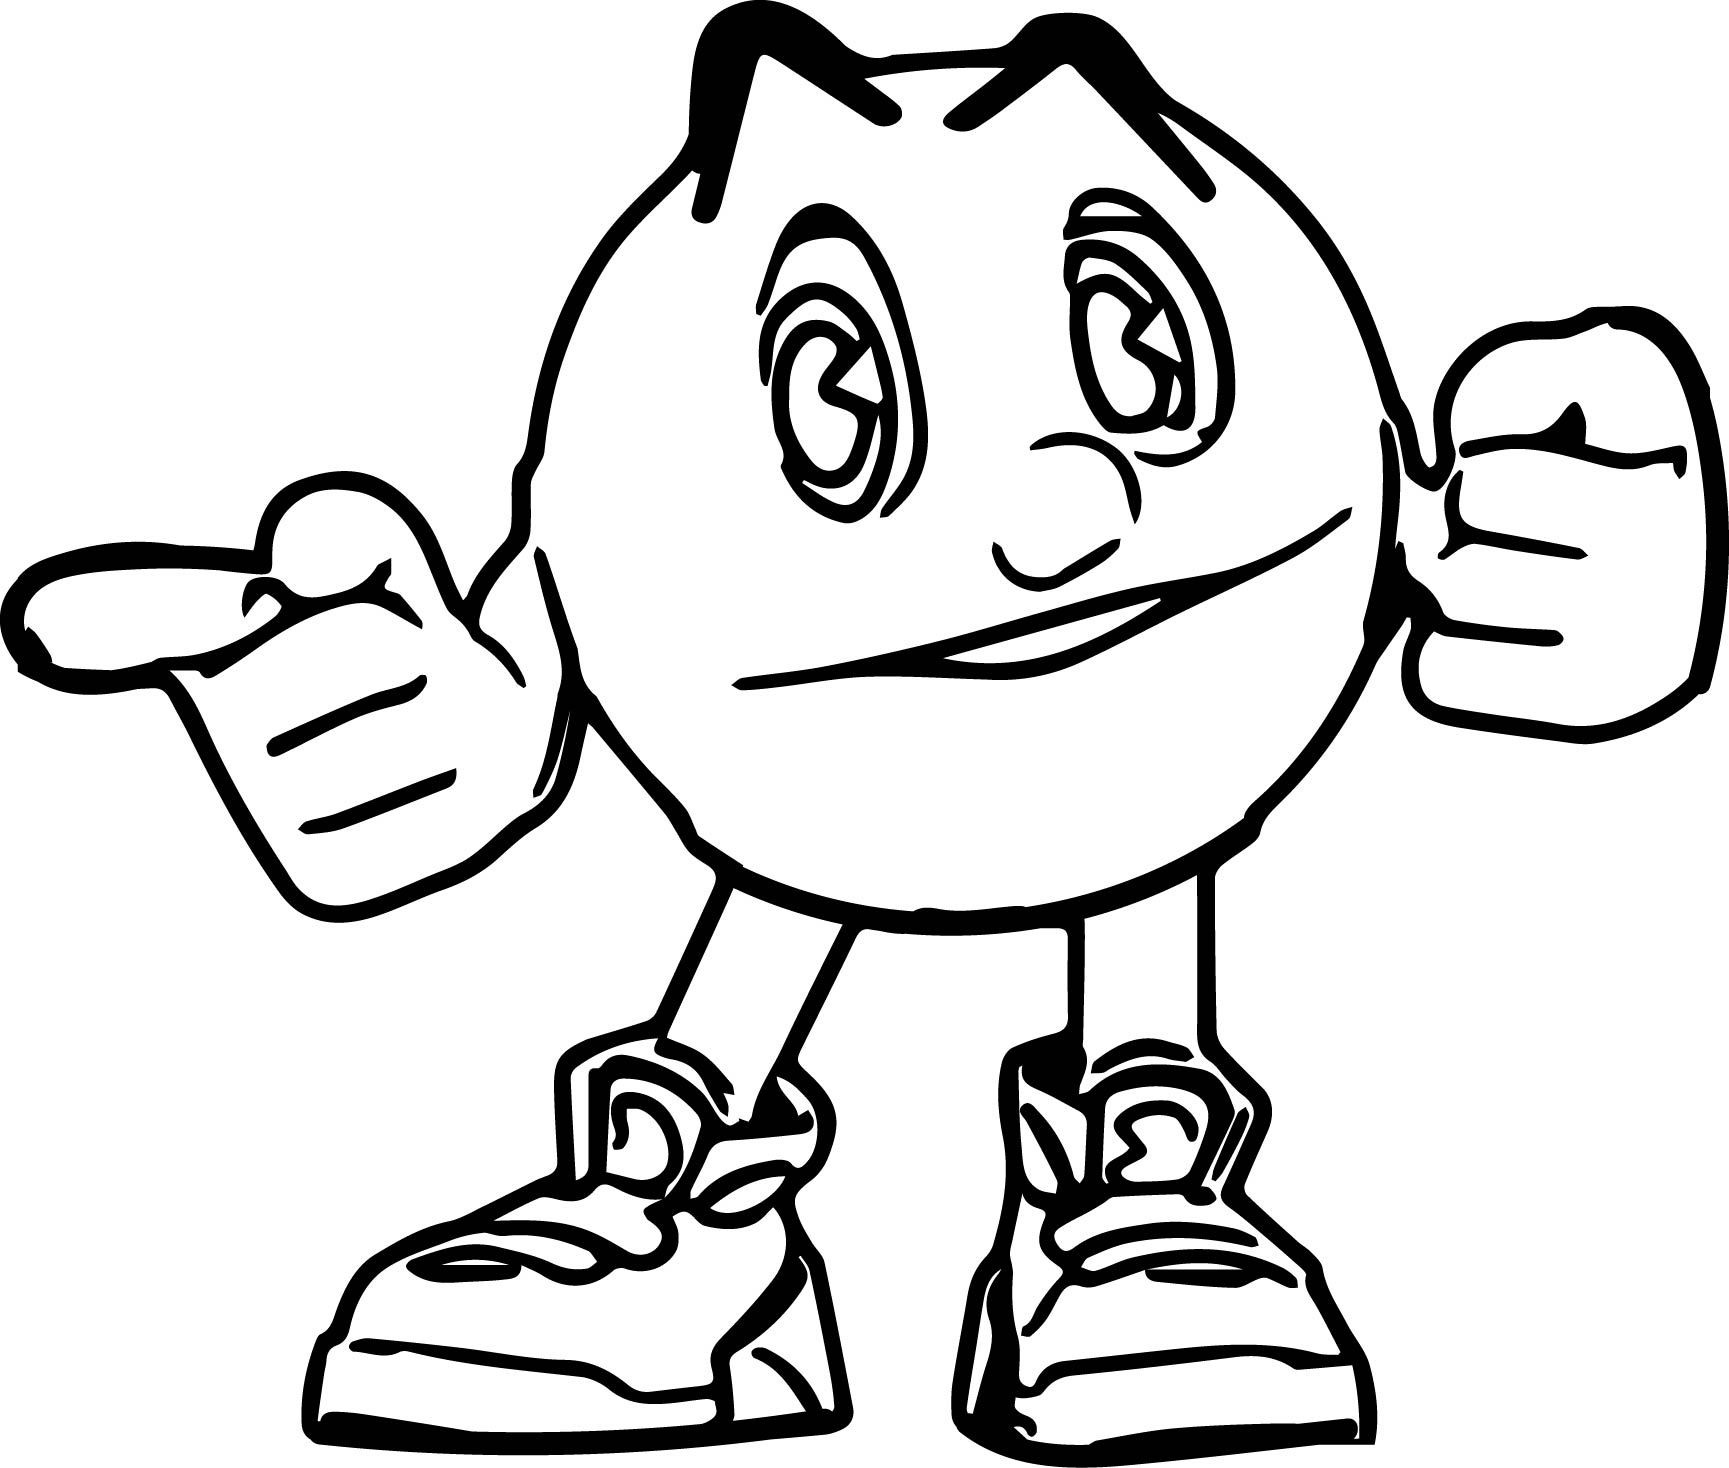 Free Pacman coloring page